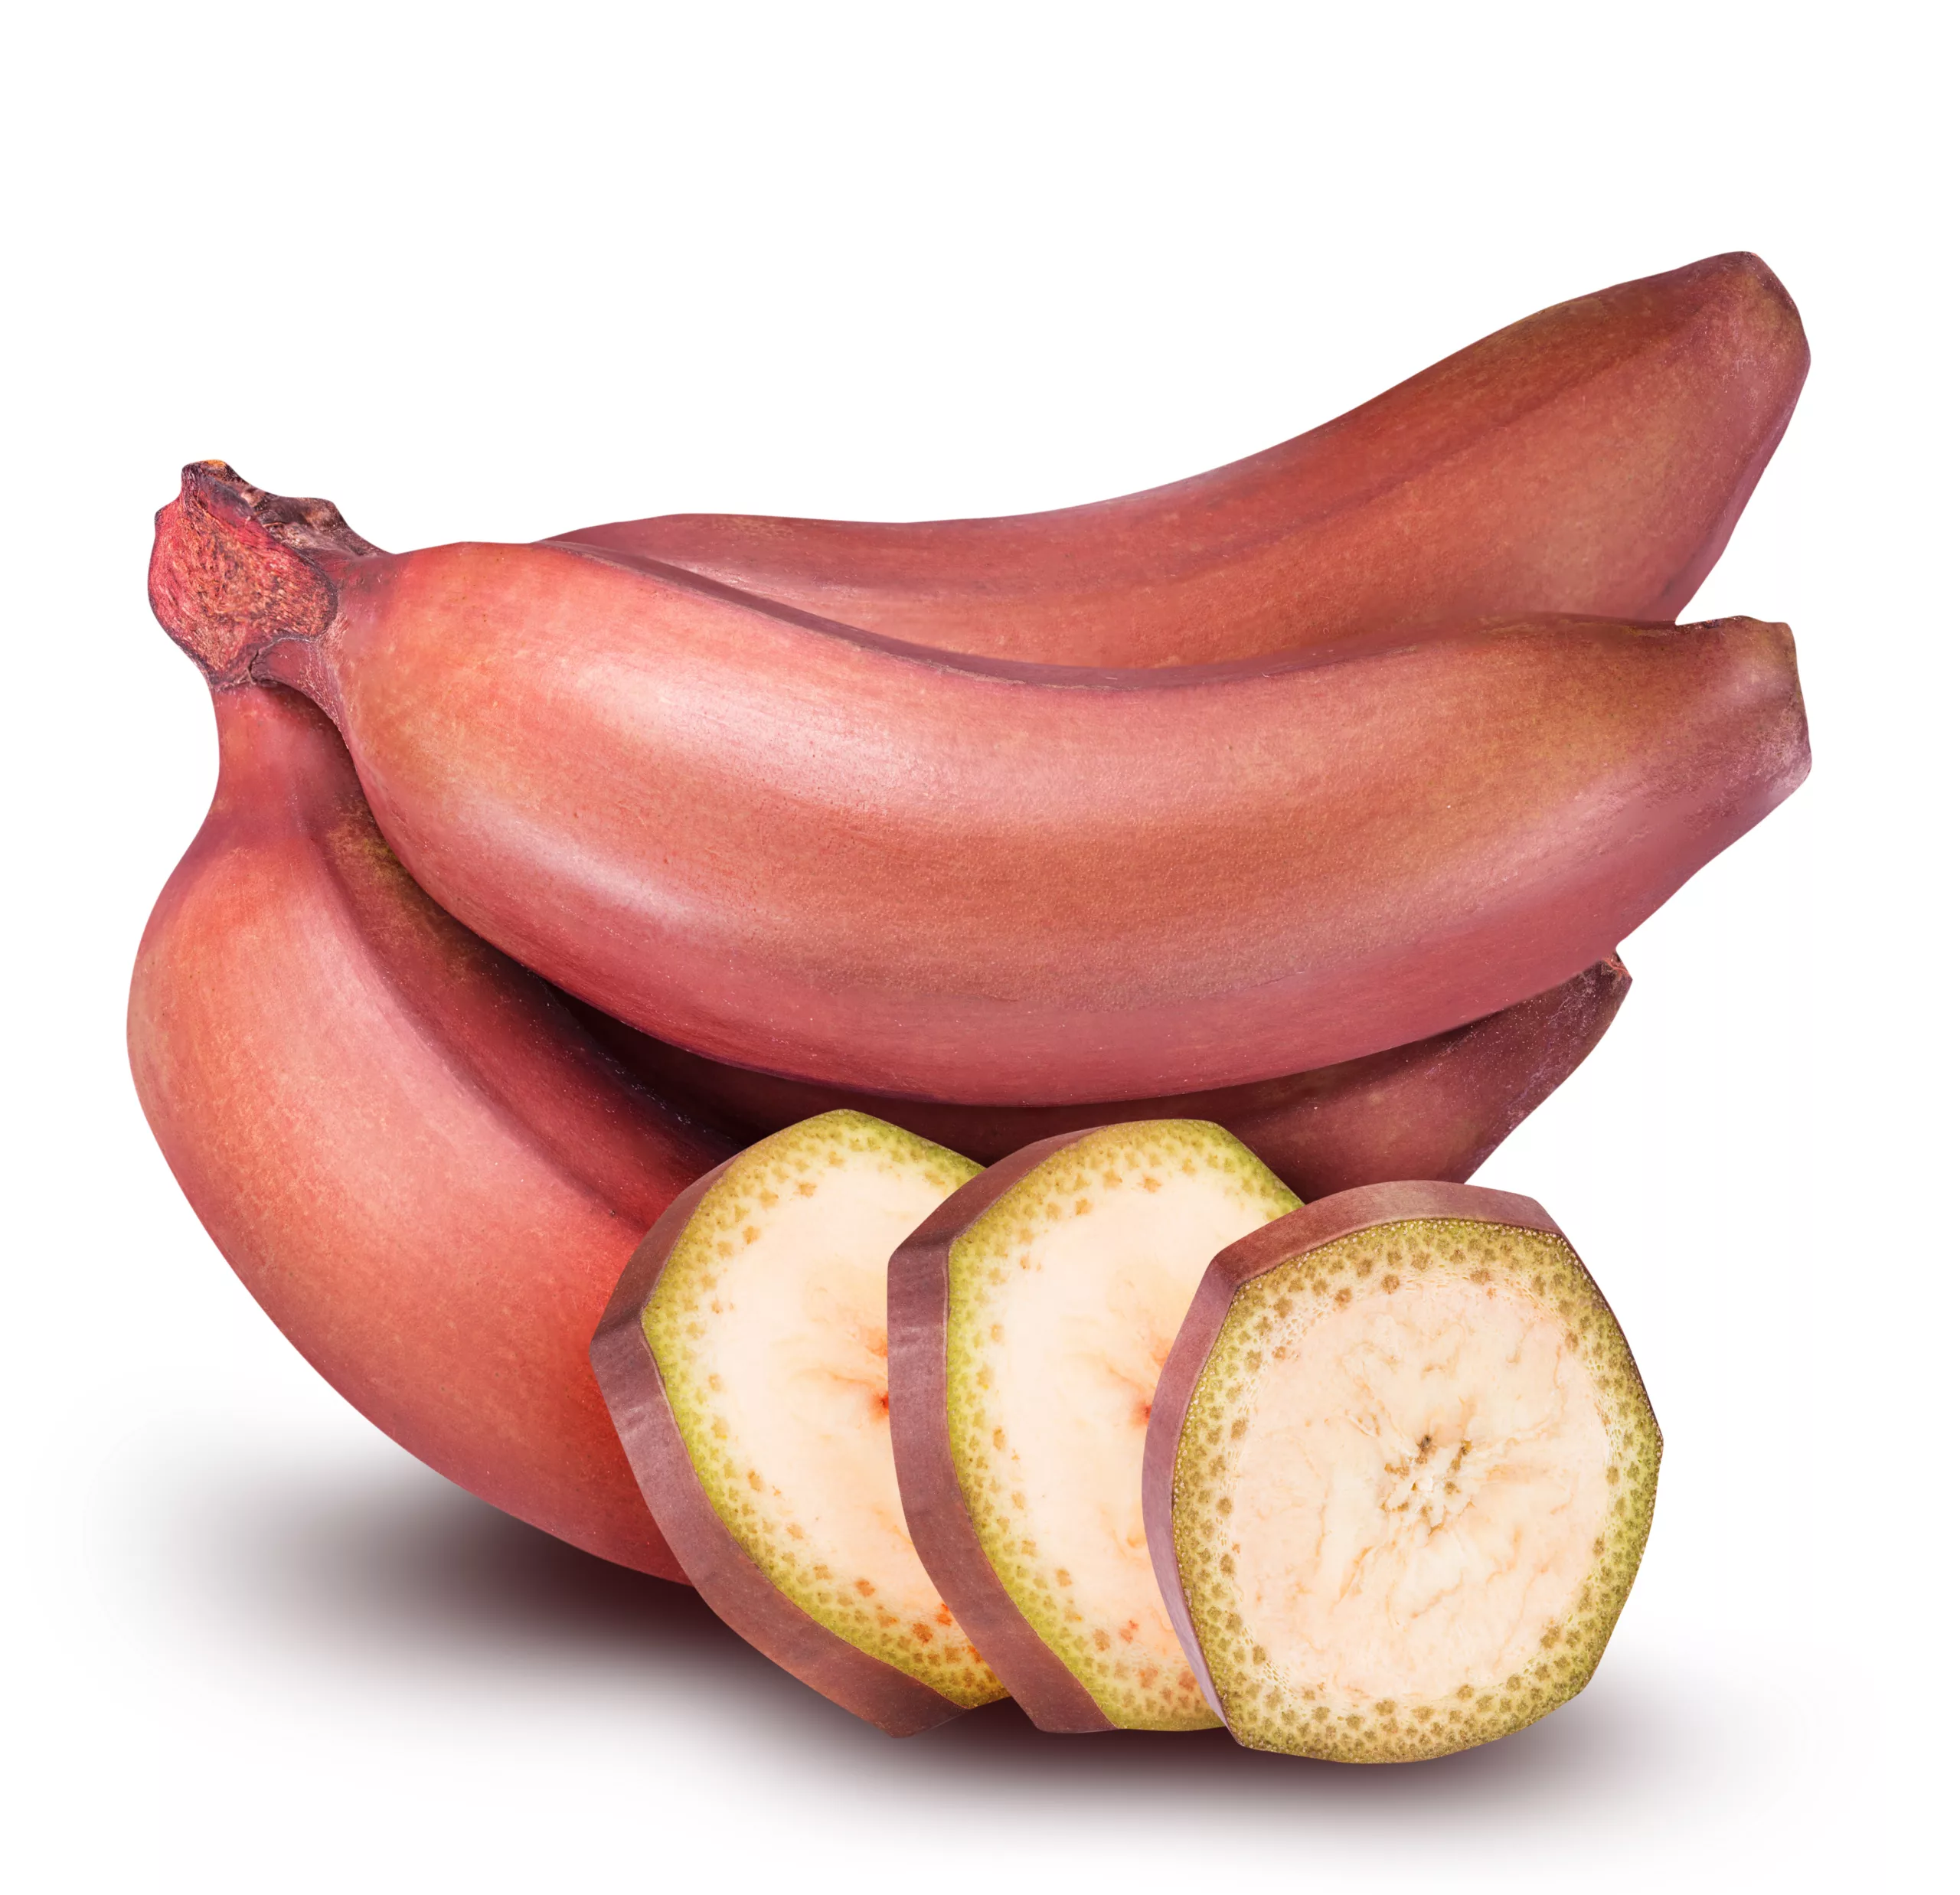 can dogs eat red bananas